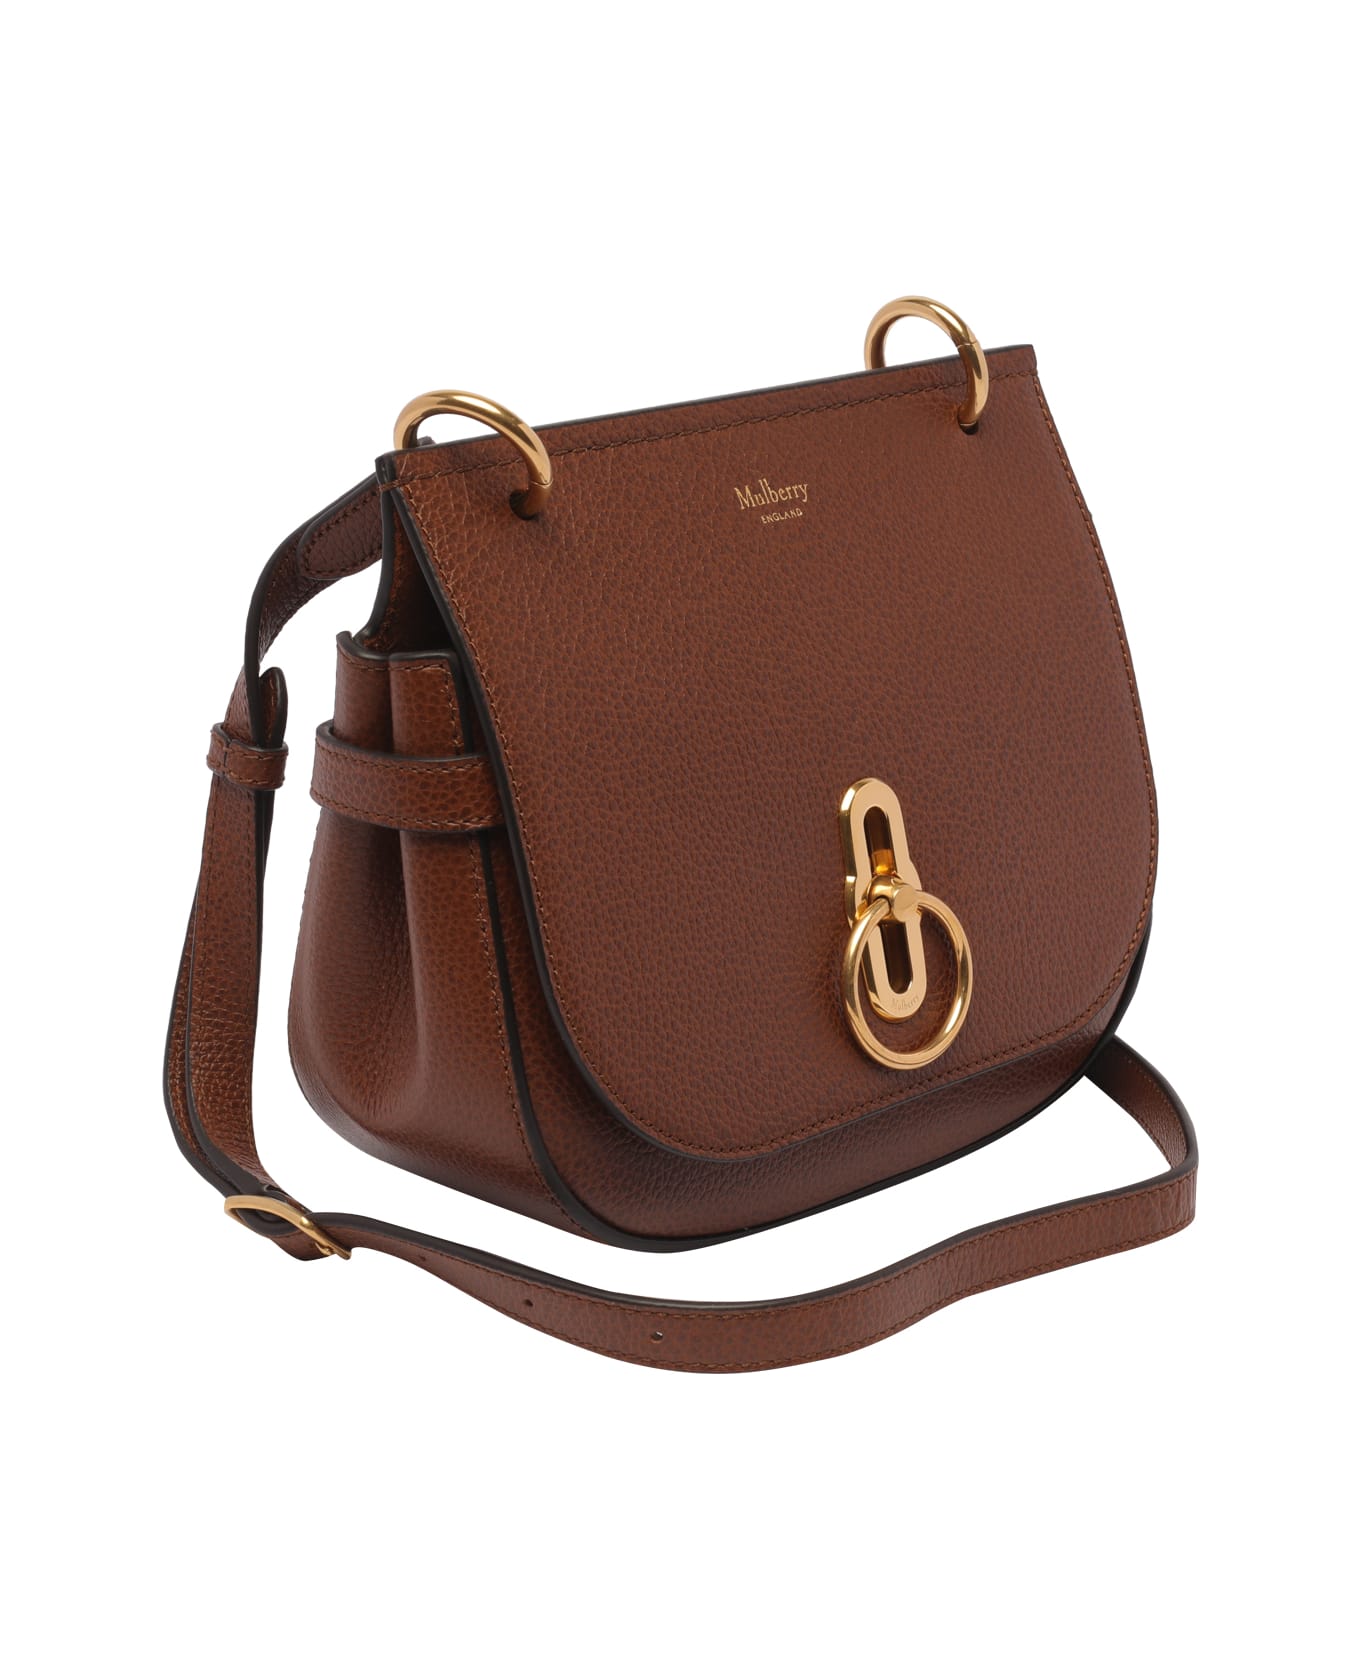 Mulberry Small Amberley Satchel Two Tone - Brown